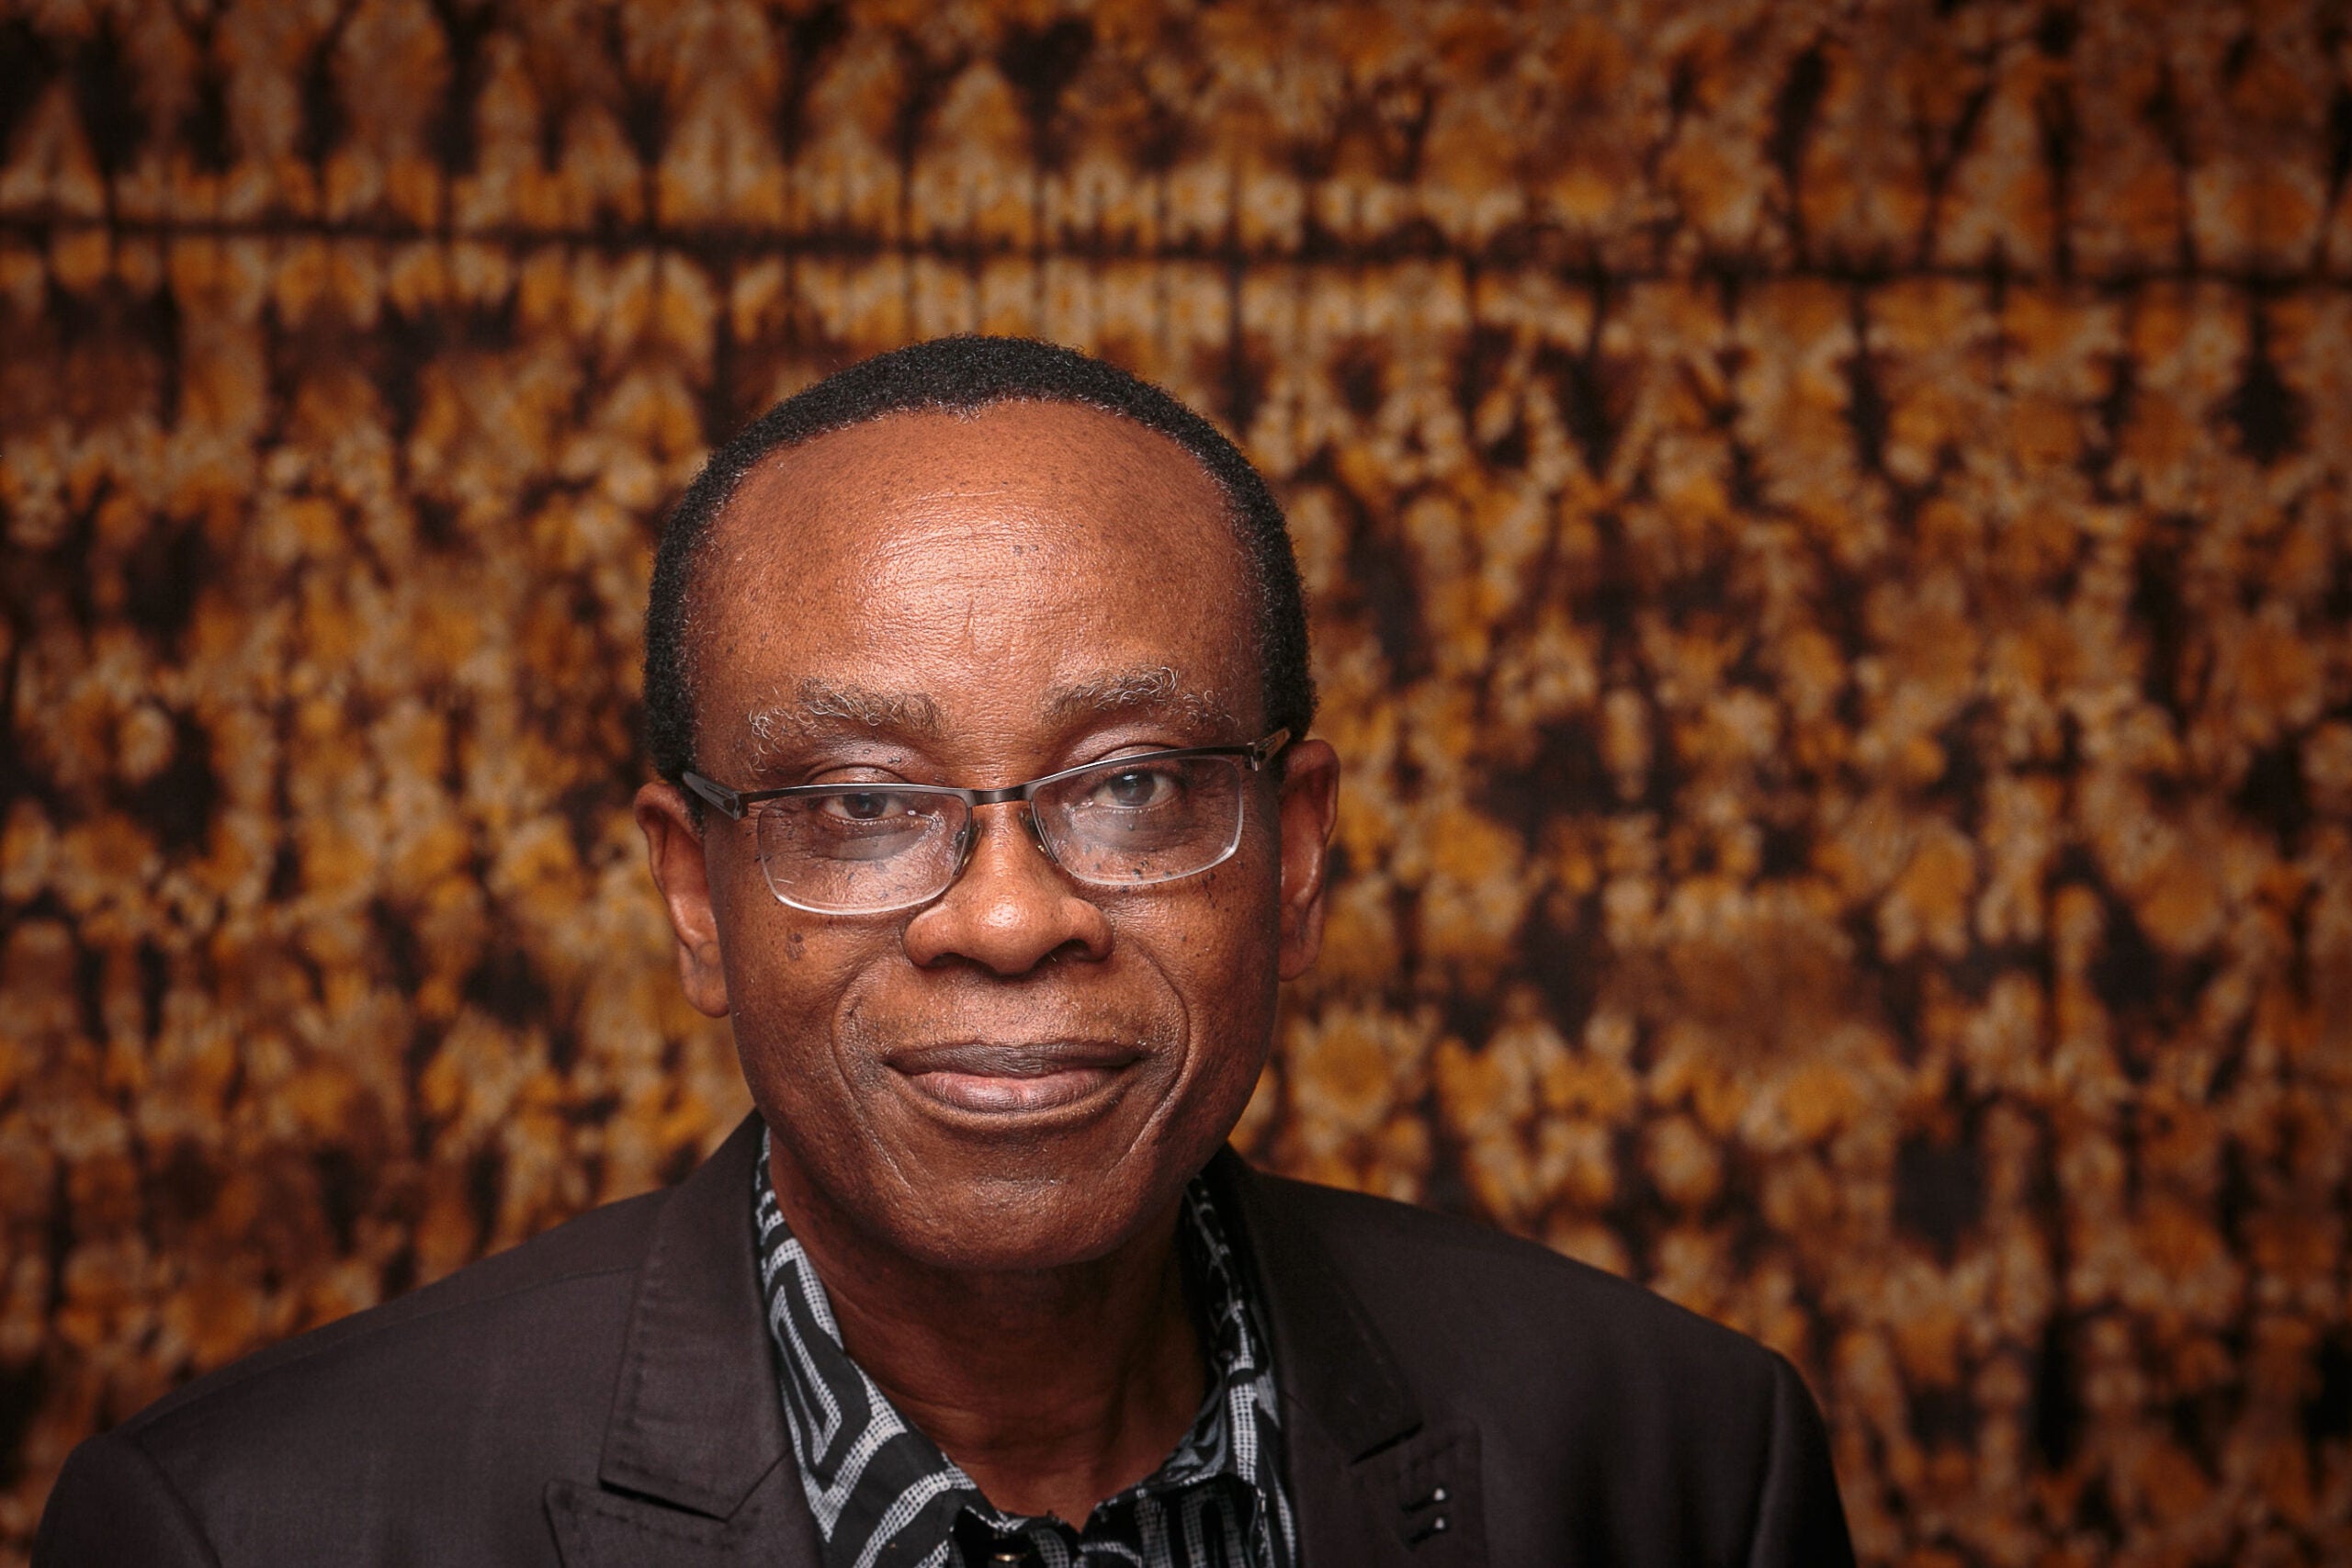 This photograph shows a Nnimmo Bassey in front of an orange patterned background.